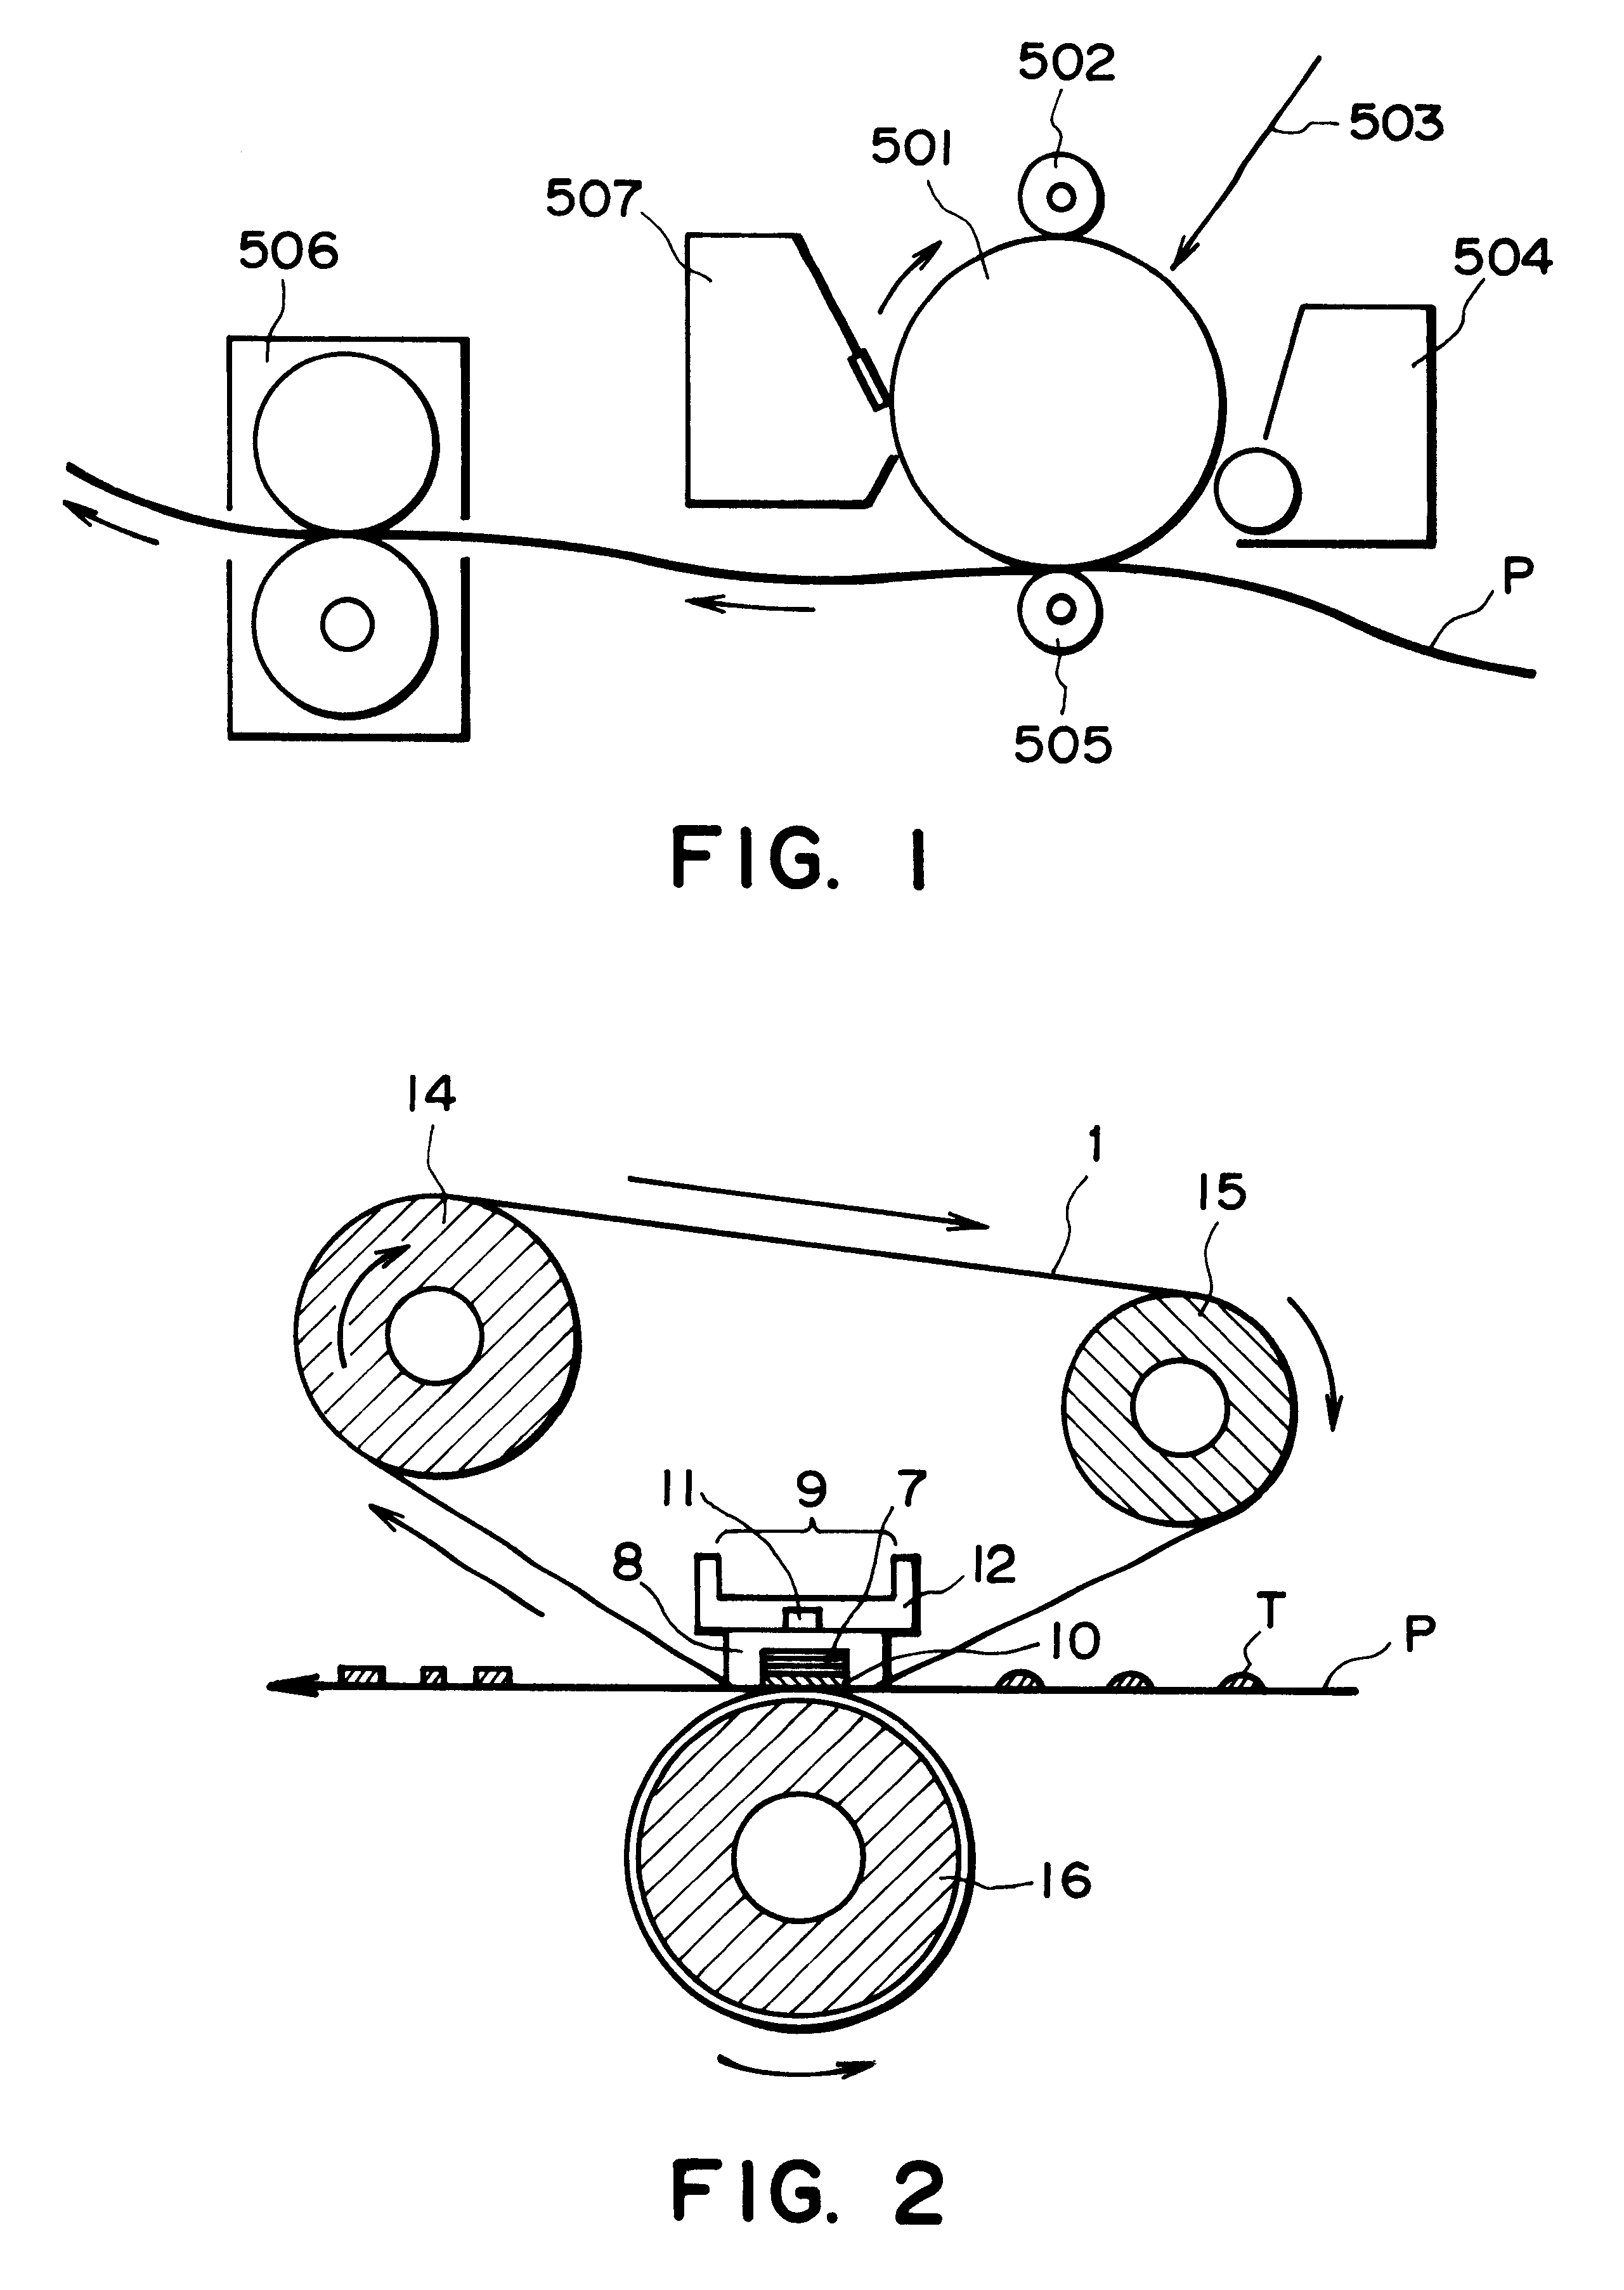 Heating device, image forming apparatus including the device and induction heating member included in the device